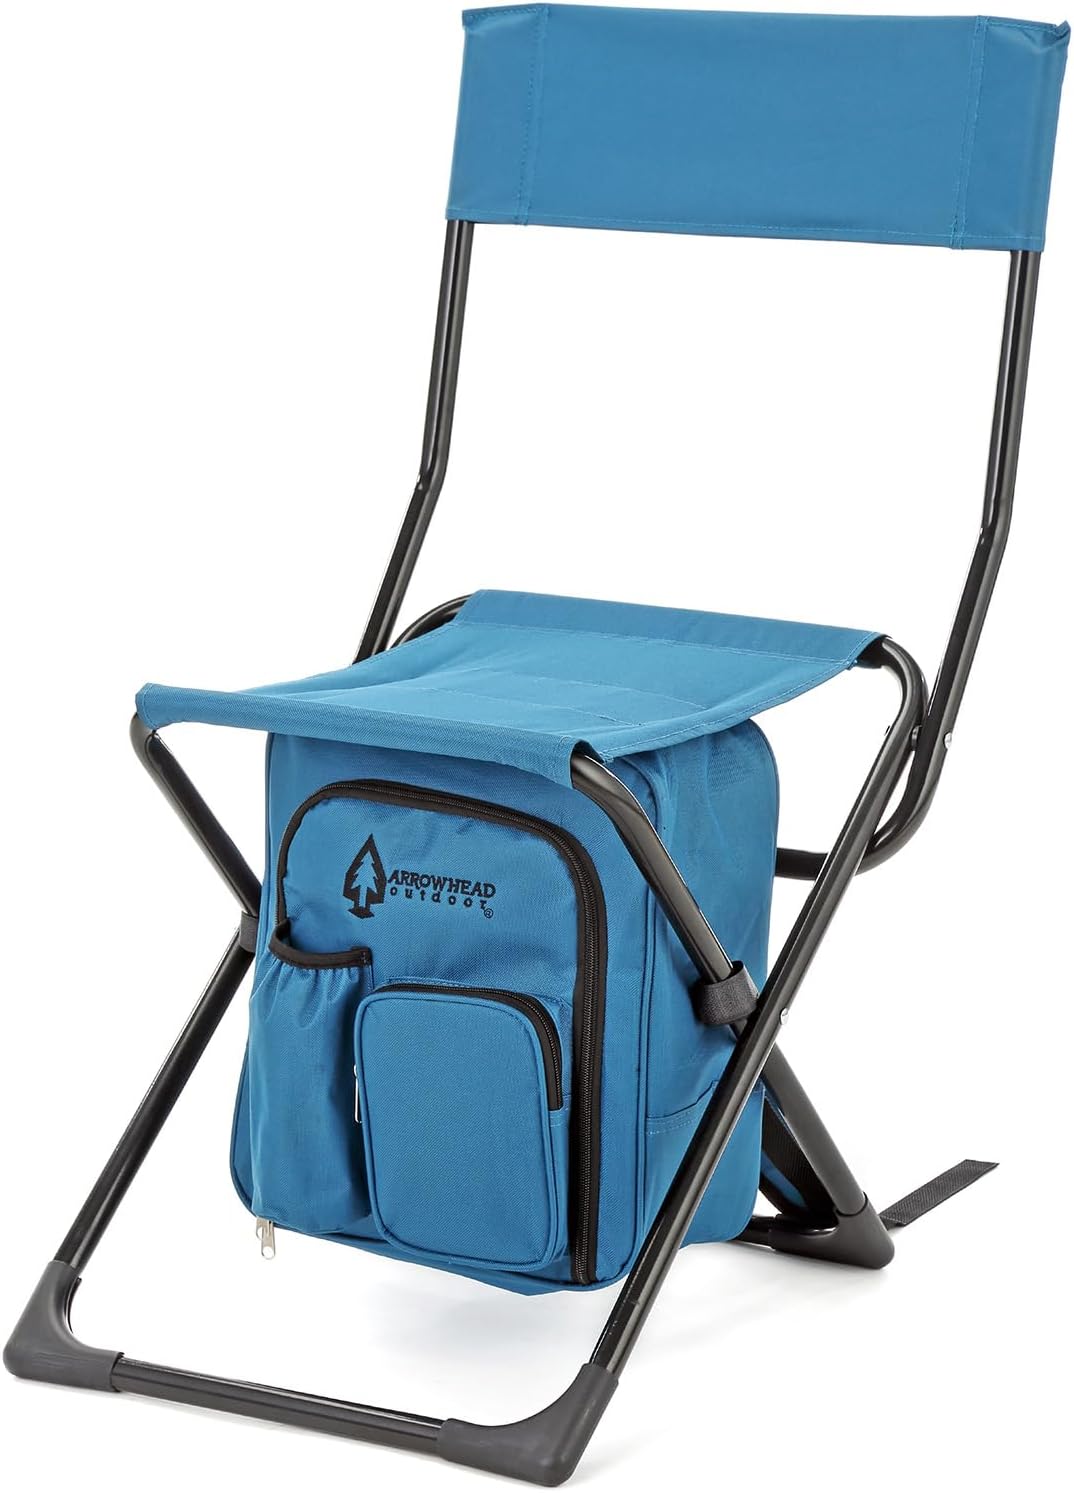 Arrowhead Outdoor Multi-function 3-in-1 Compact Camp Chair: Backpack, Stool & Insulated Cooler, w/ External Pockets & Storage Bag, Lightweight, Large